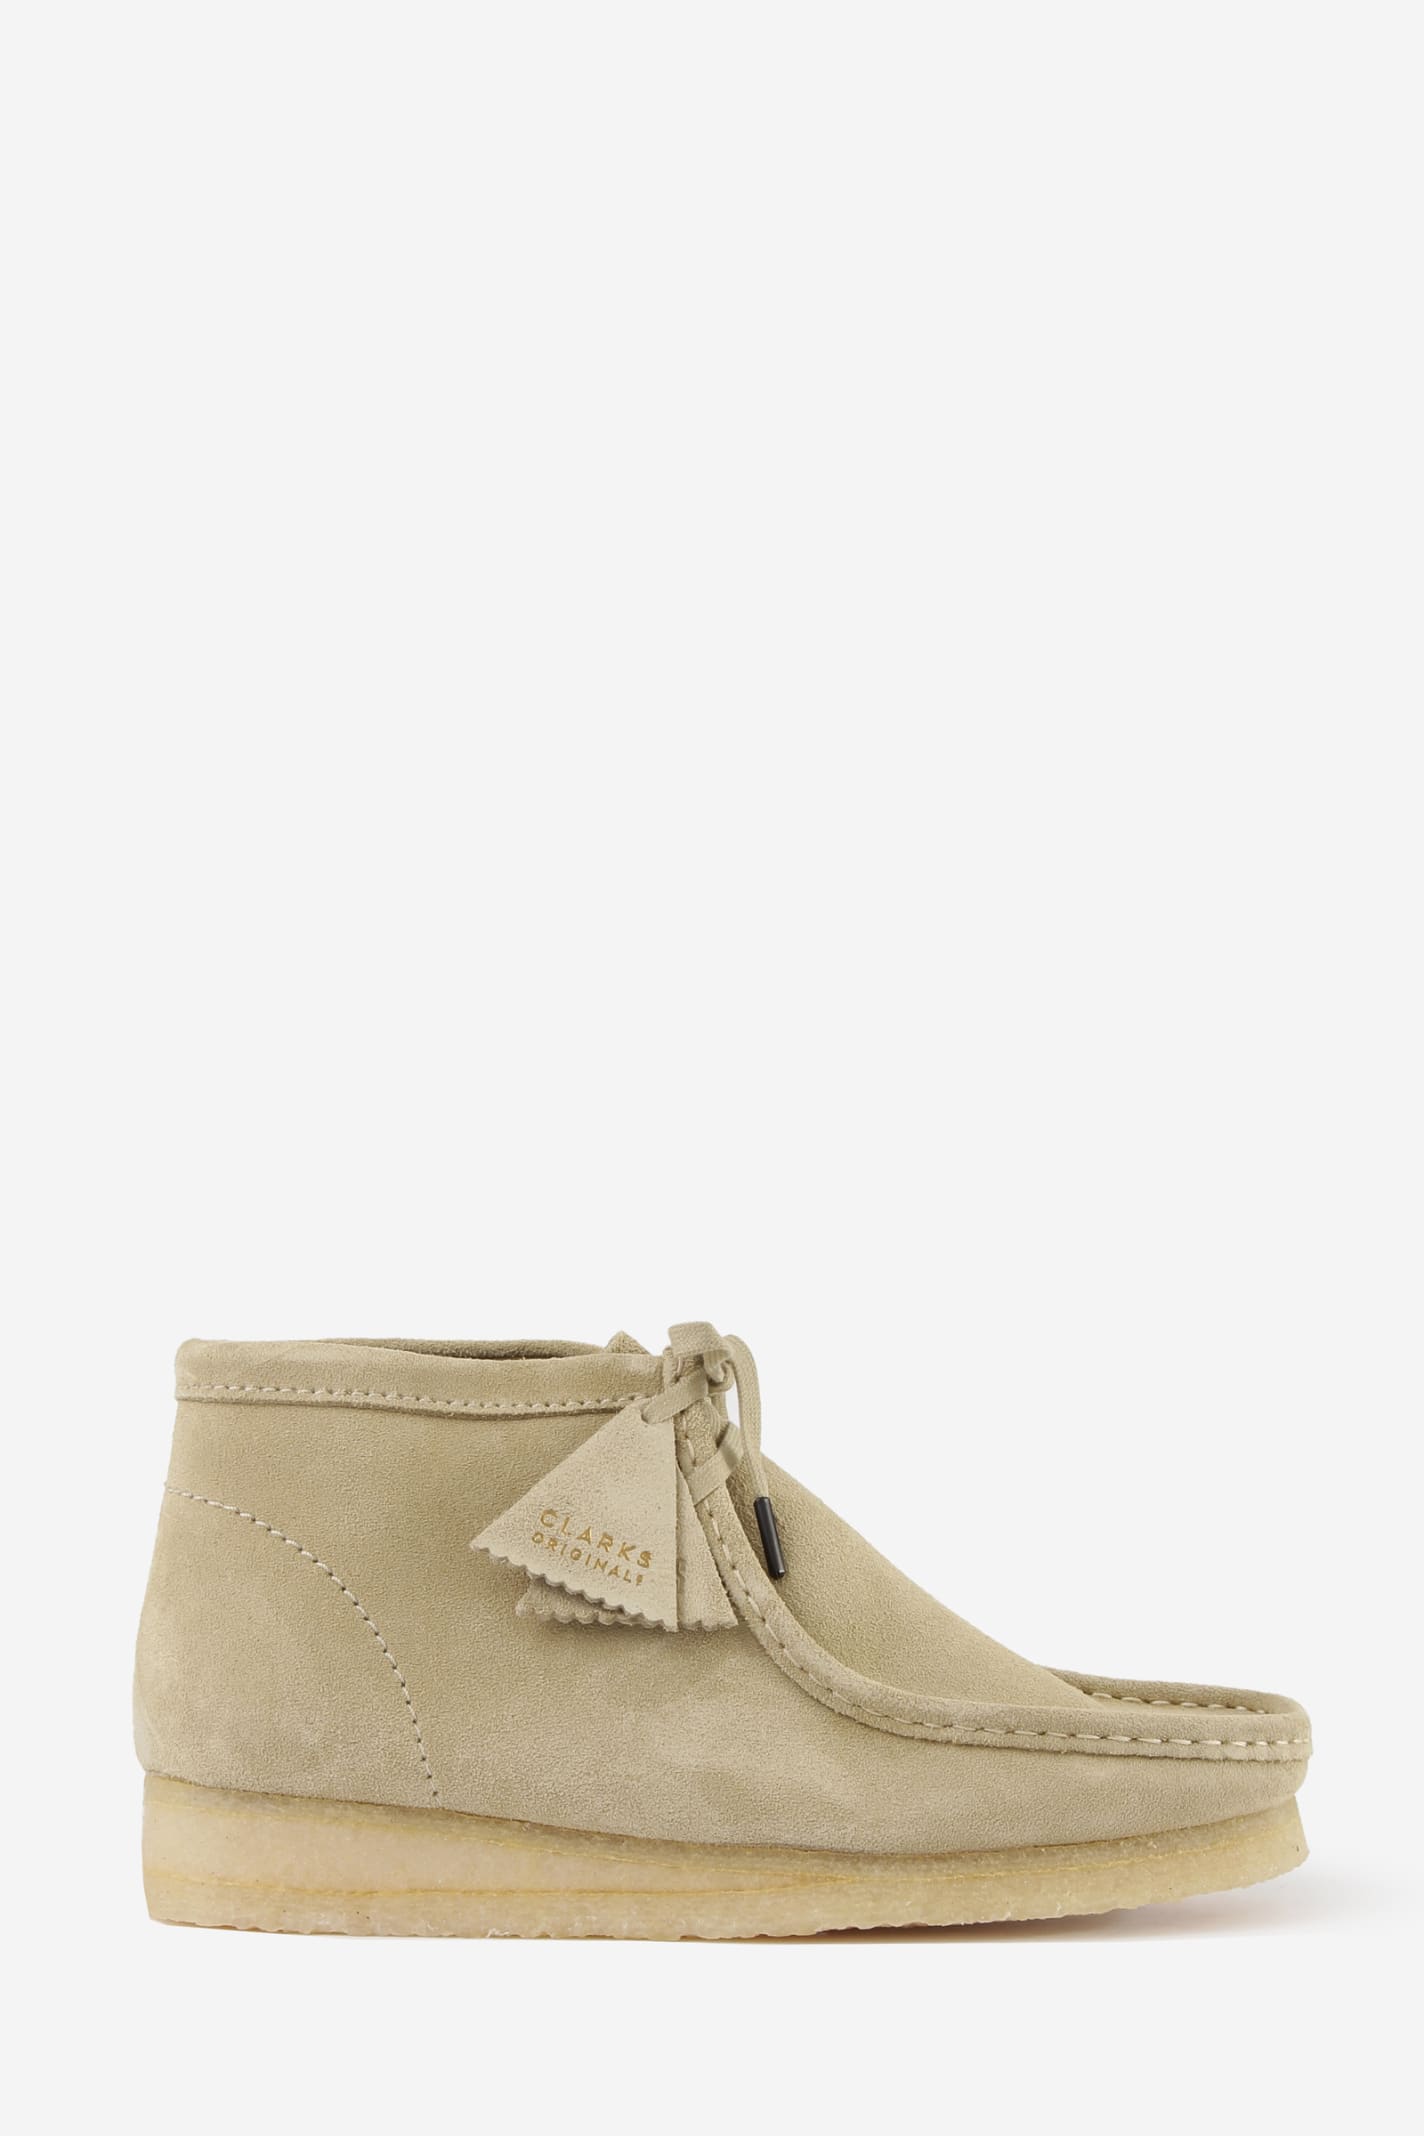 Clarks Wallabee Boot Shoes